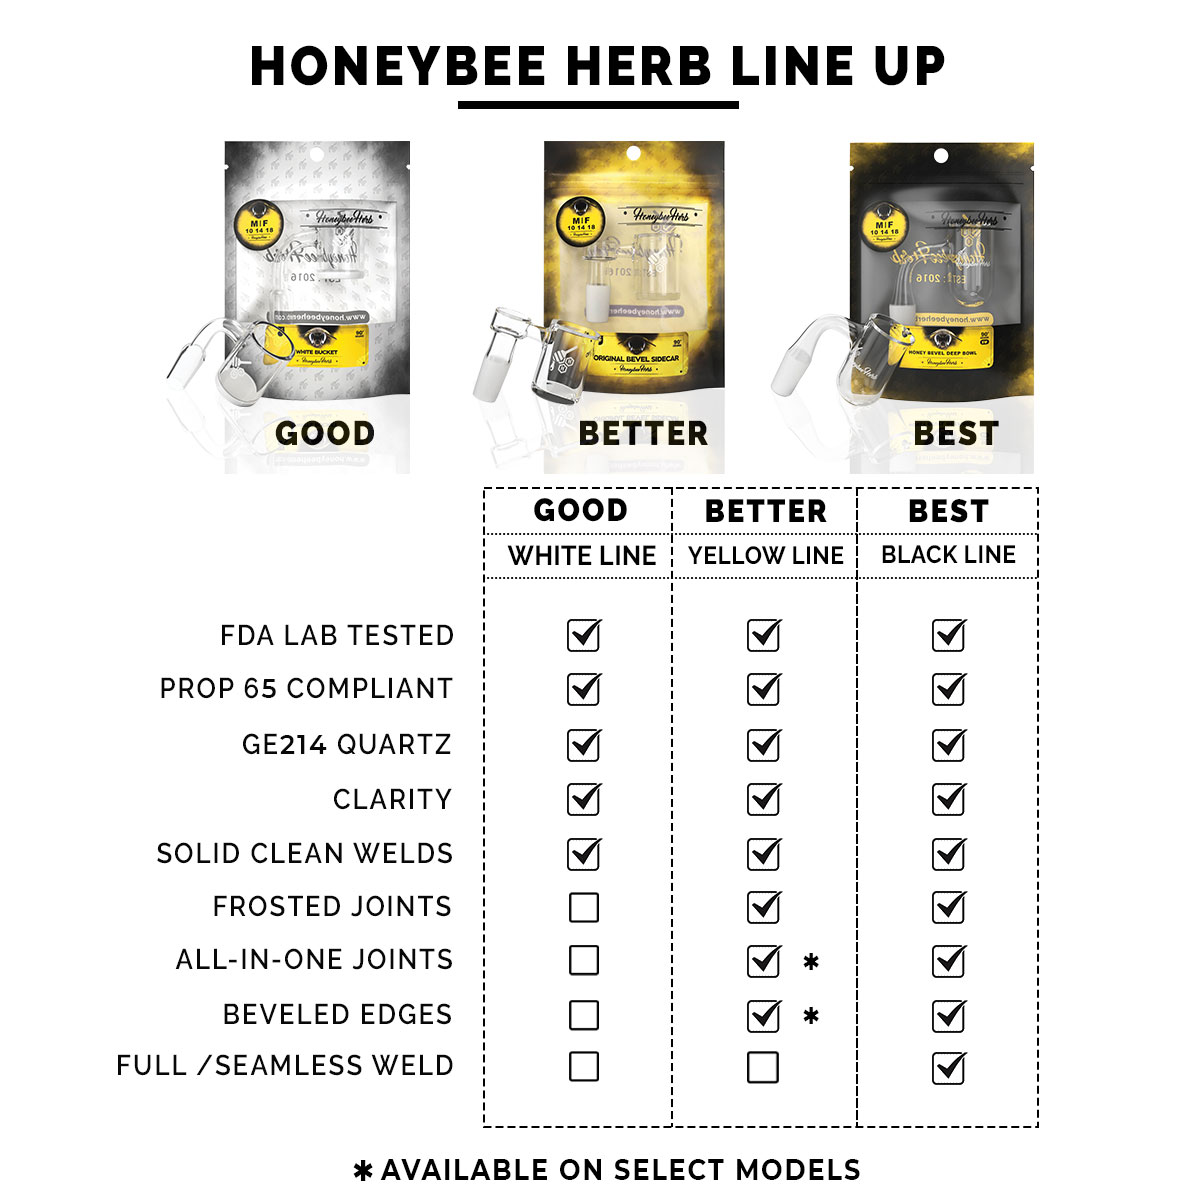 Honeybee Herb quartz banger comparison chart, showcasing quality tiers from Good to Best